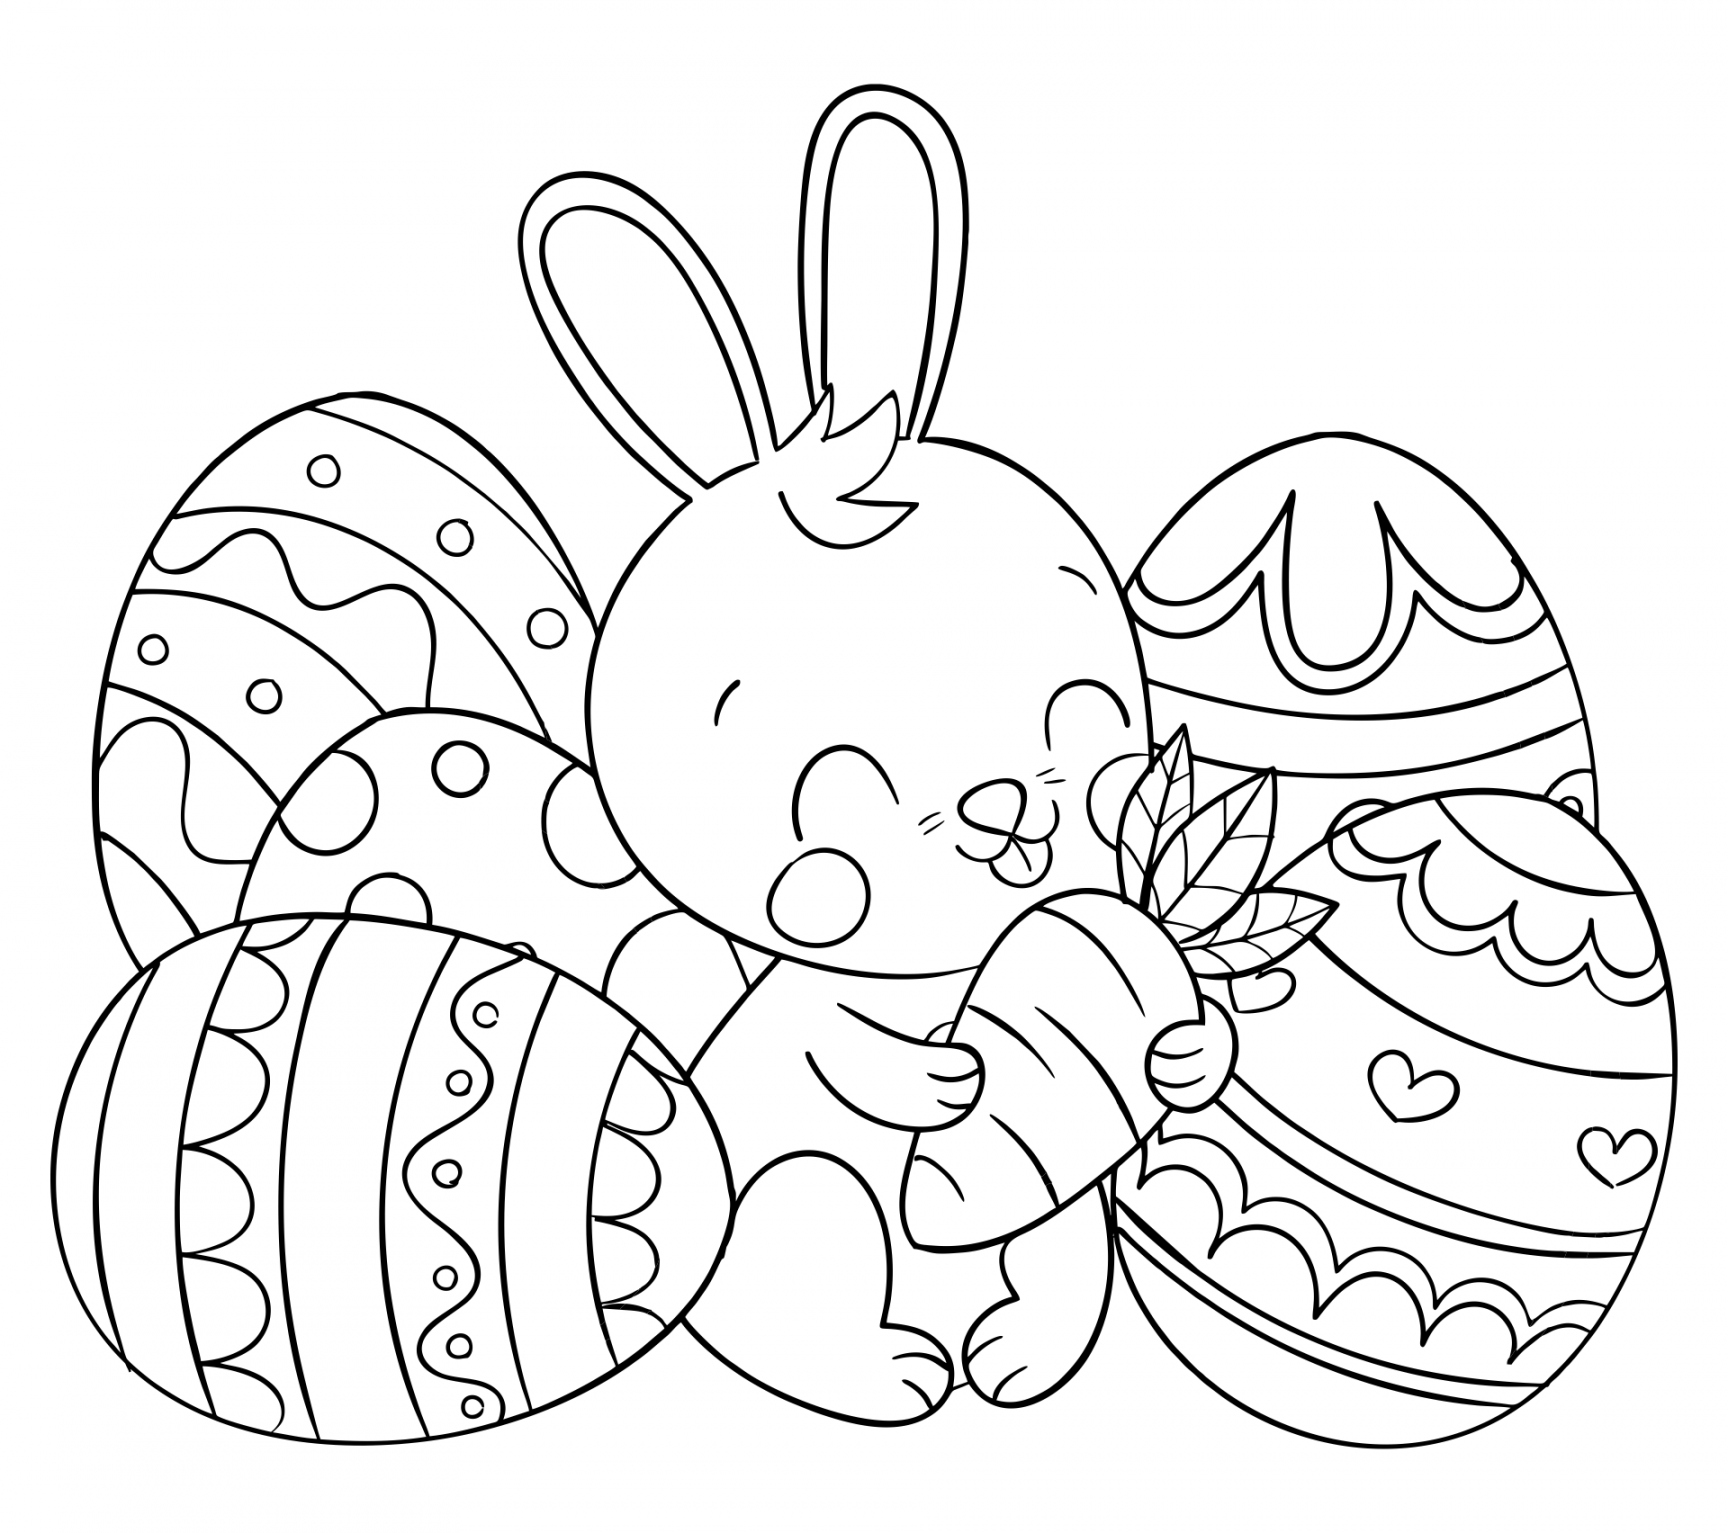 Free Printable Coloring Pages Easter - Printable -  Best Free Printable Easter Egg Coloring Page - printablee